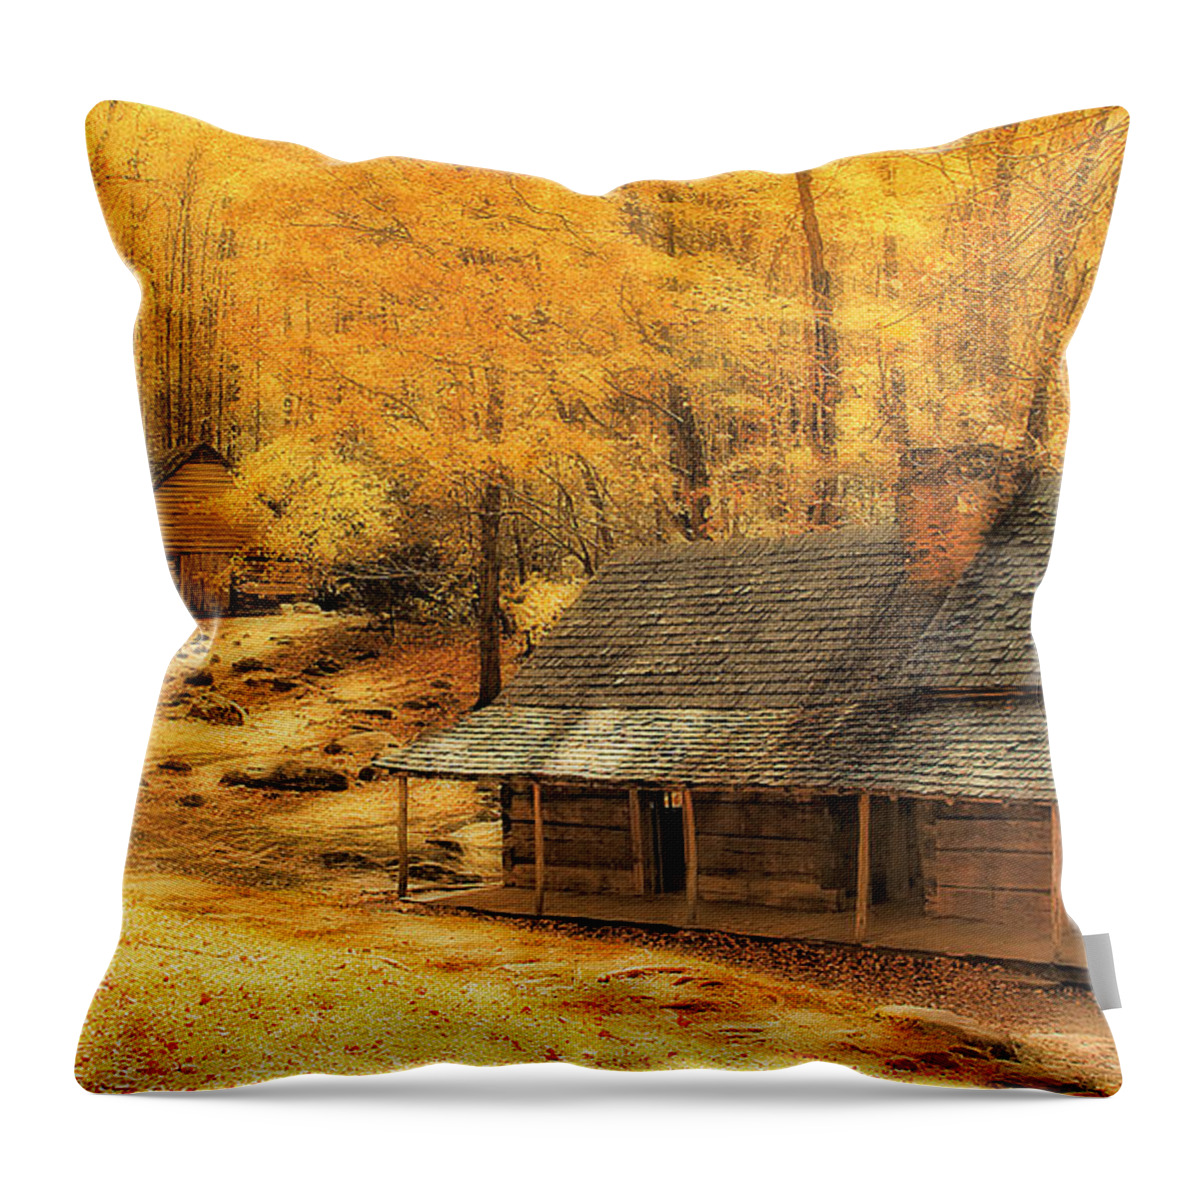 Gold Throw Pillow featuring the photograph Golden Dream Home by Geraldine DeBoer